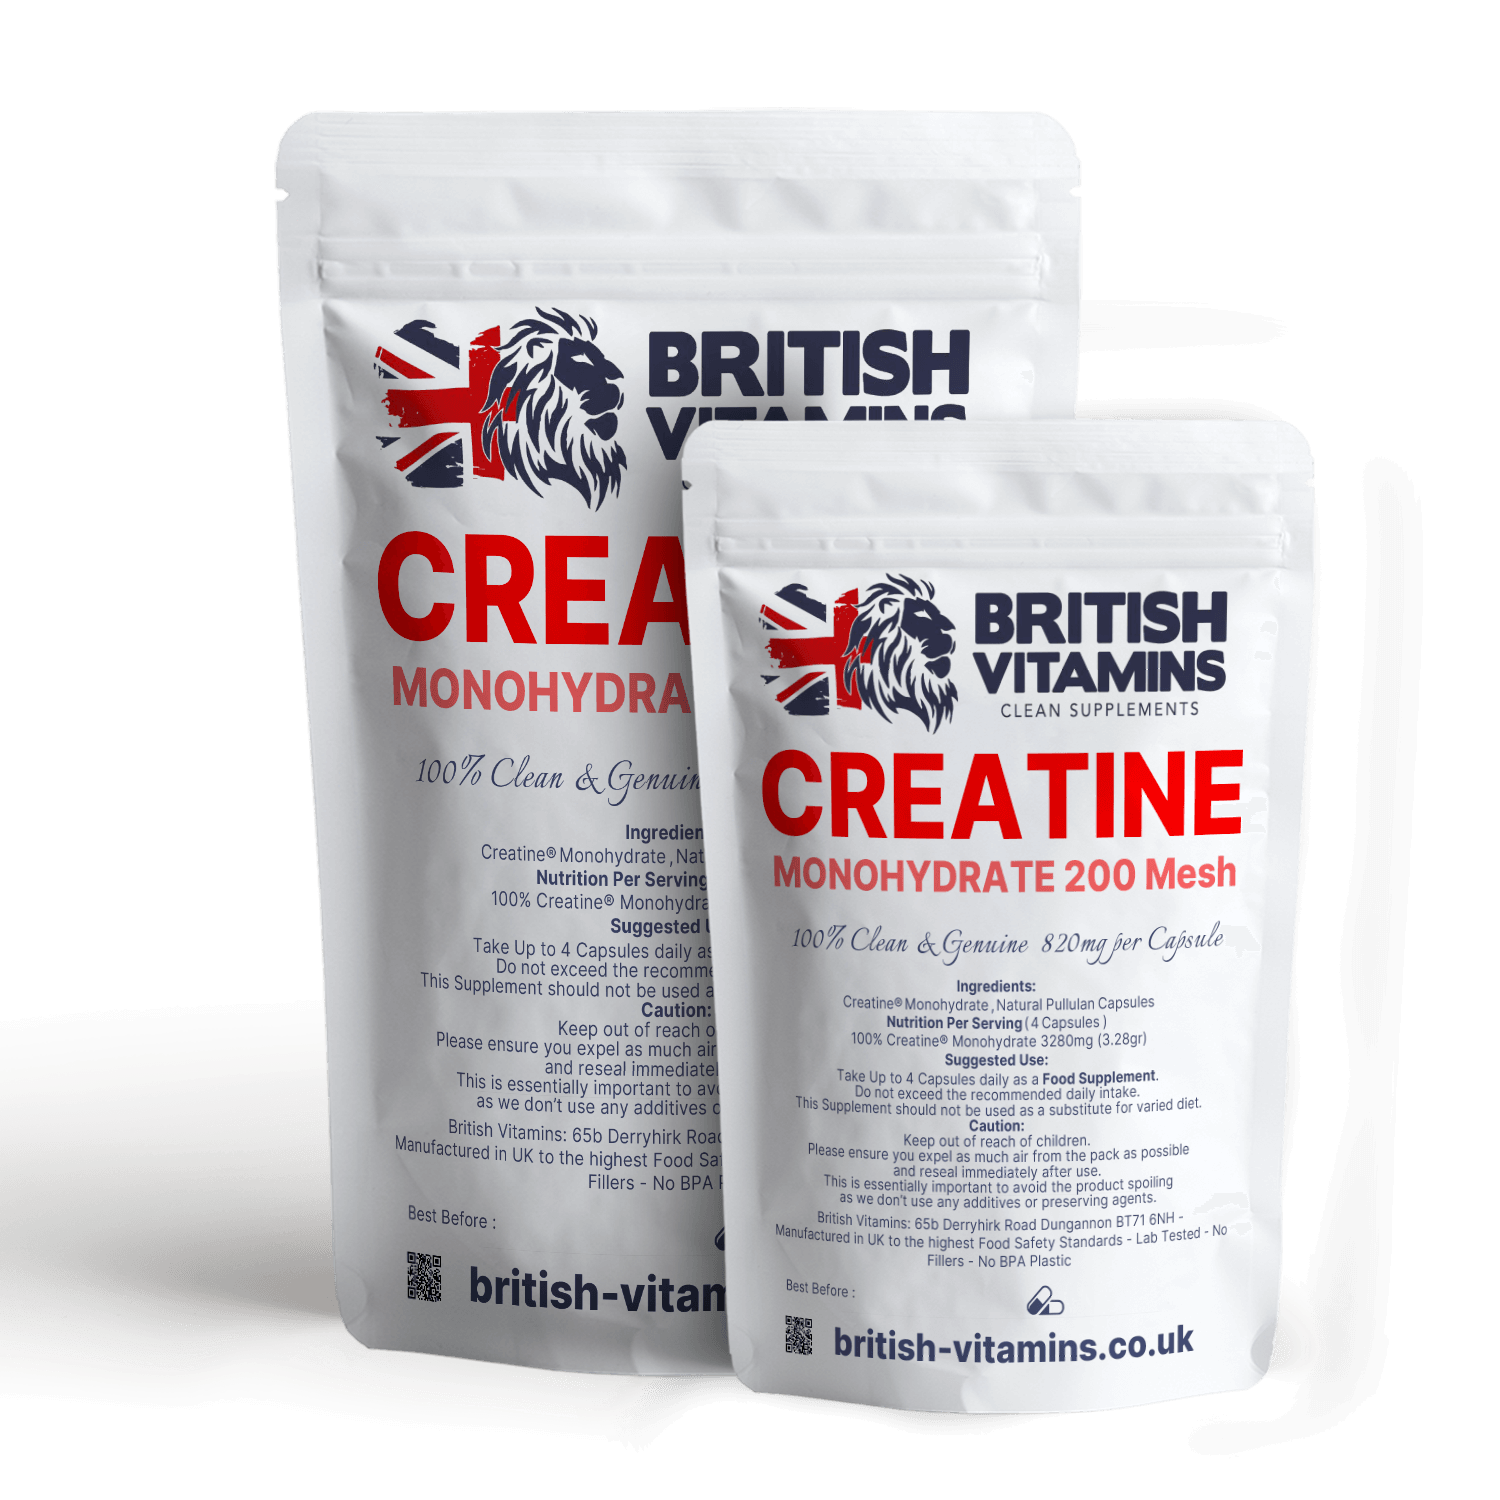 Creatine Monohydrate Capsules 3280mg Serving Health & Beauty:Vitamins & Lifestyle Supplements:Sports Supplements:Protein Shakes & Bodybuilding British Vitamins 60 capsules  